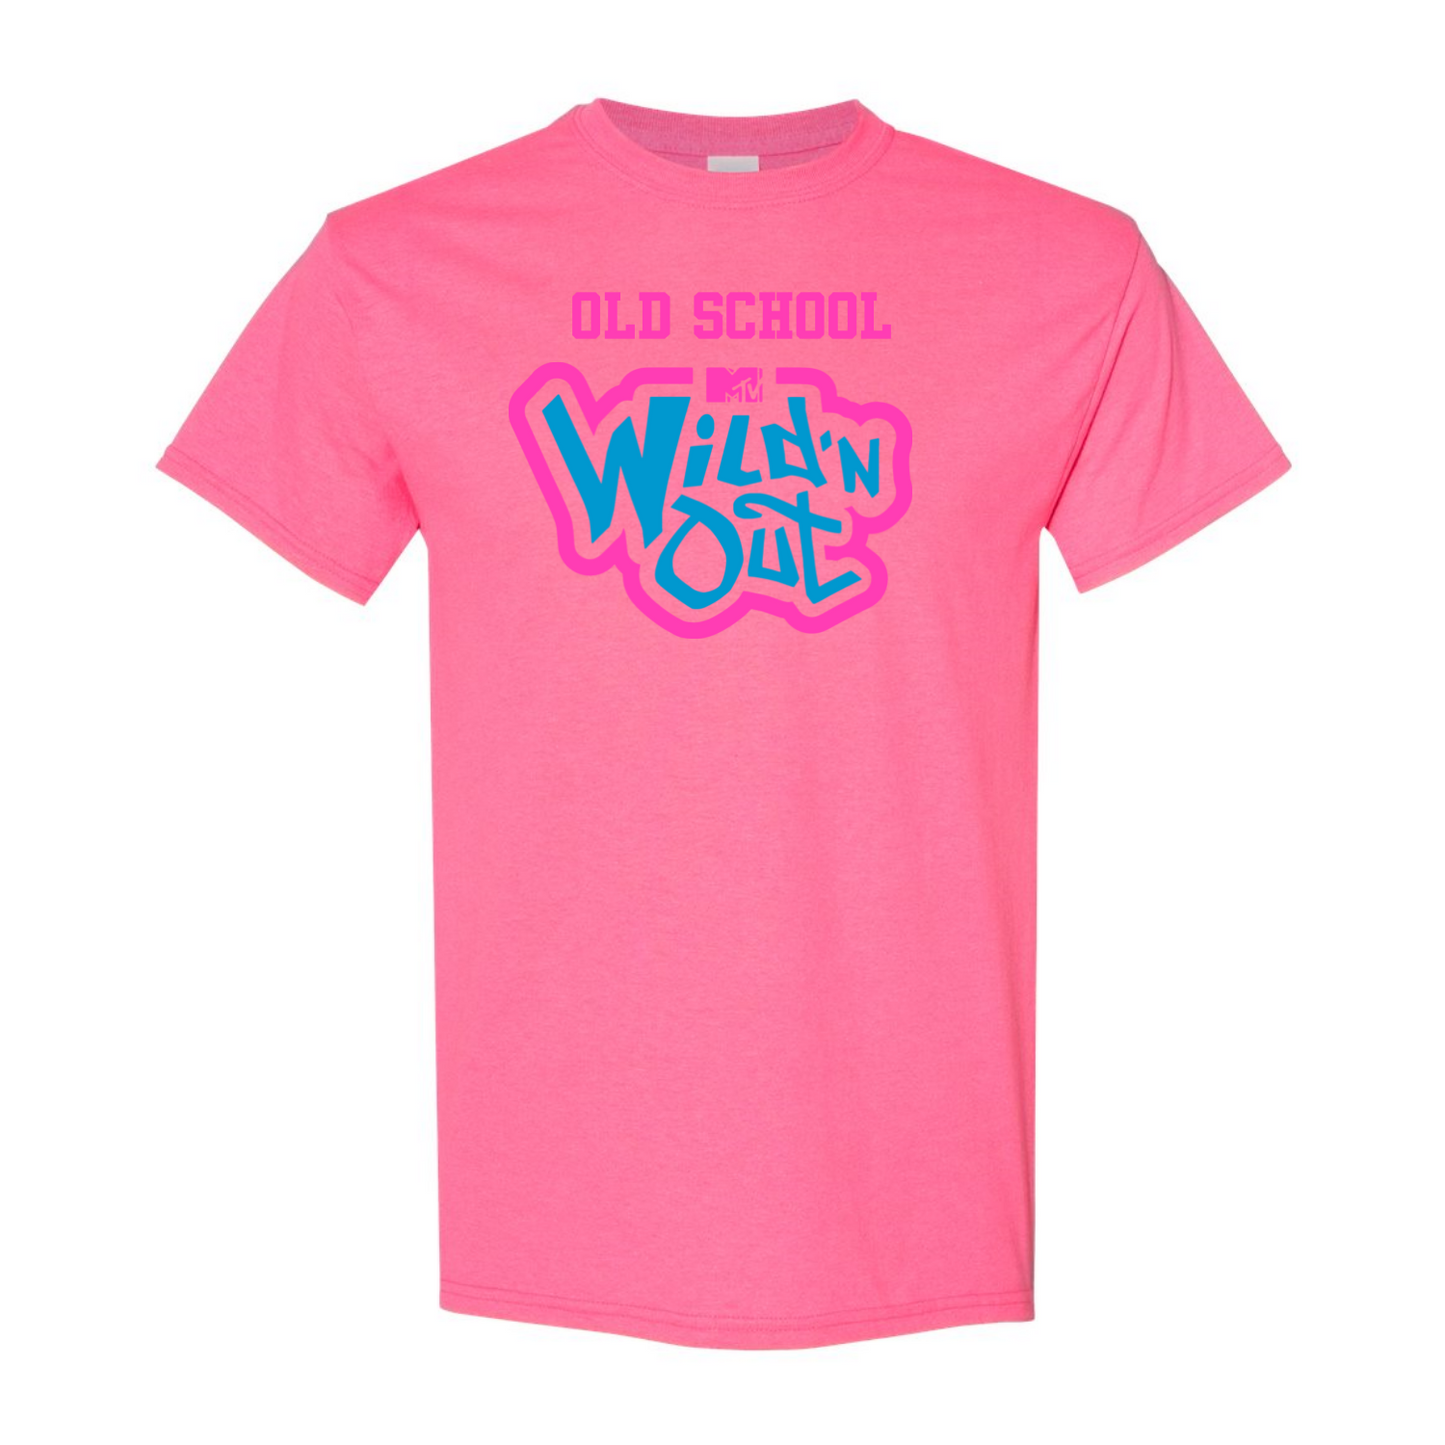 Wild 'N Out Neon Pink Old School Adult Short Sleeve T-Shirt